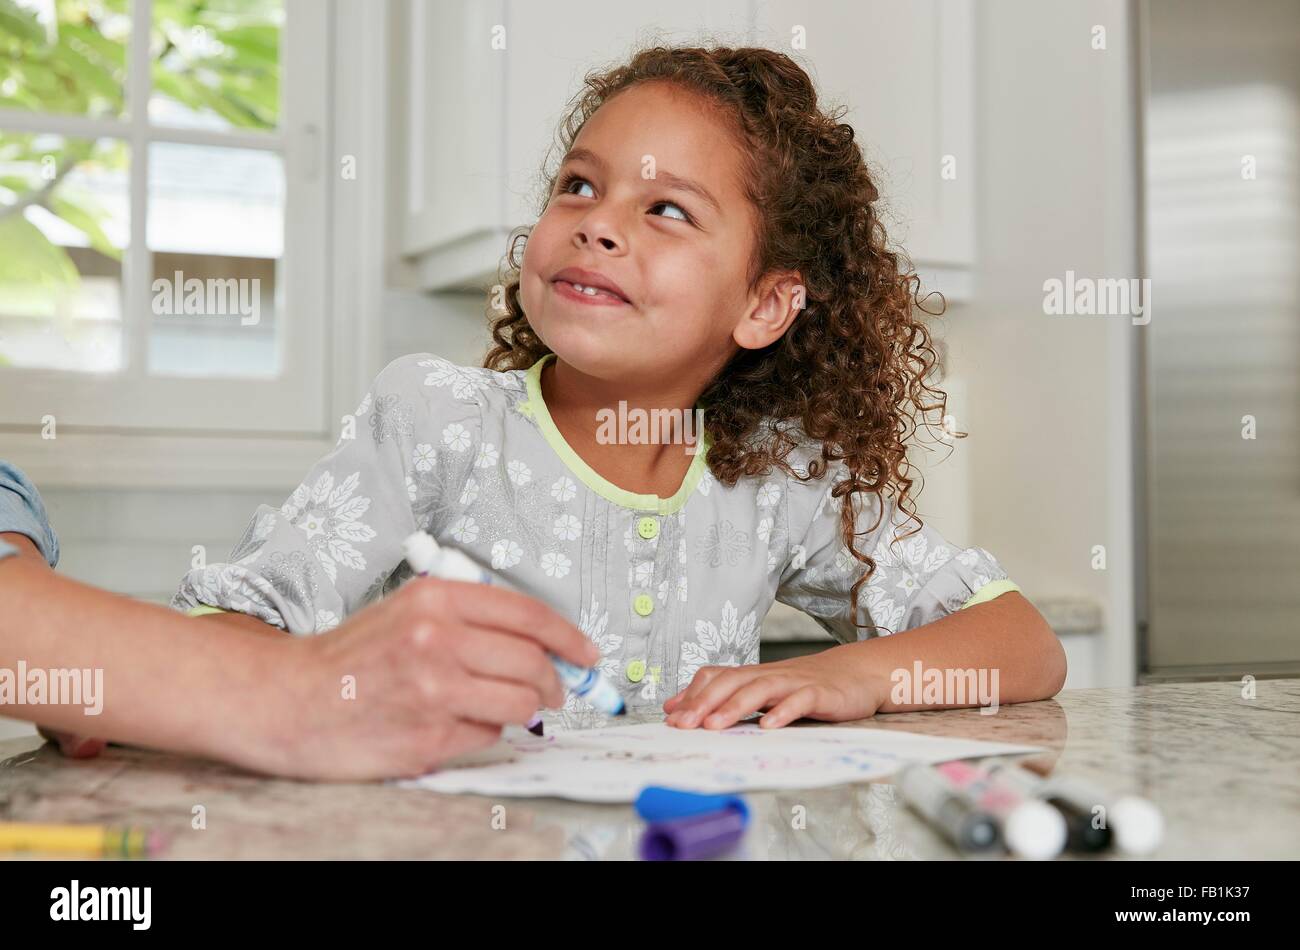 Girl at kitchen counter using felt tip pen to draw picture, looking up smiling Stock Photo